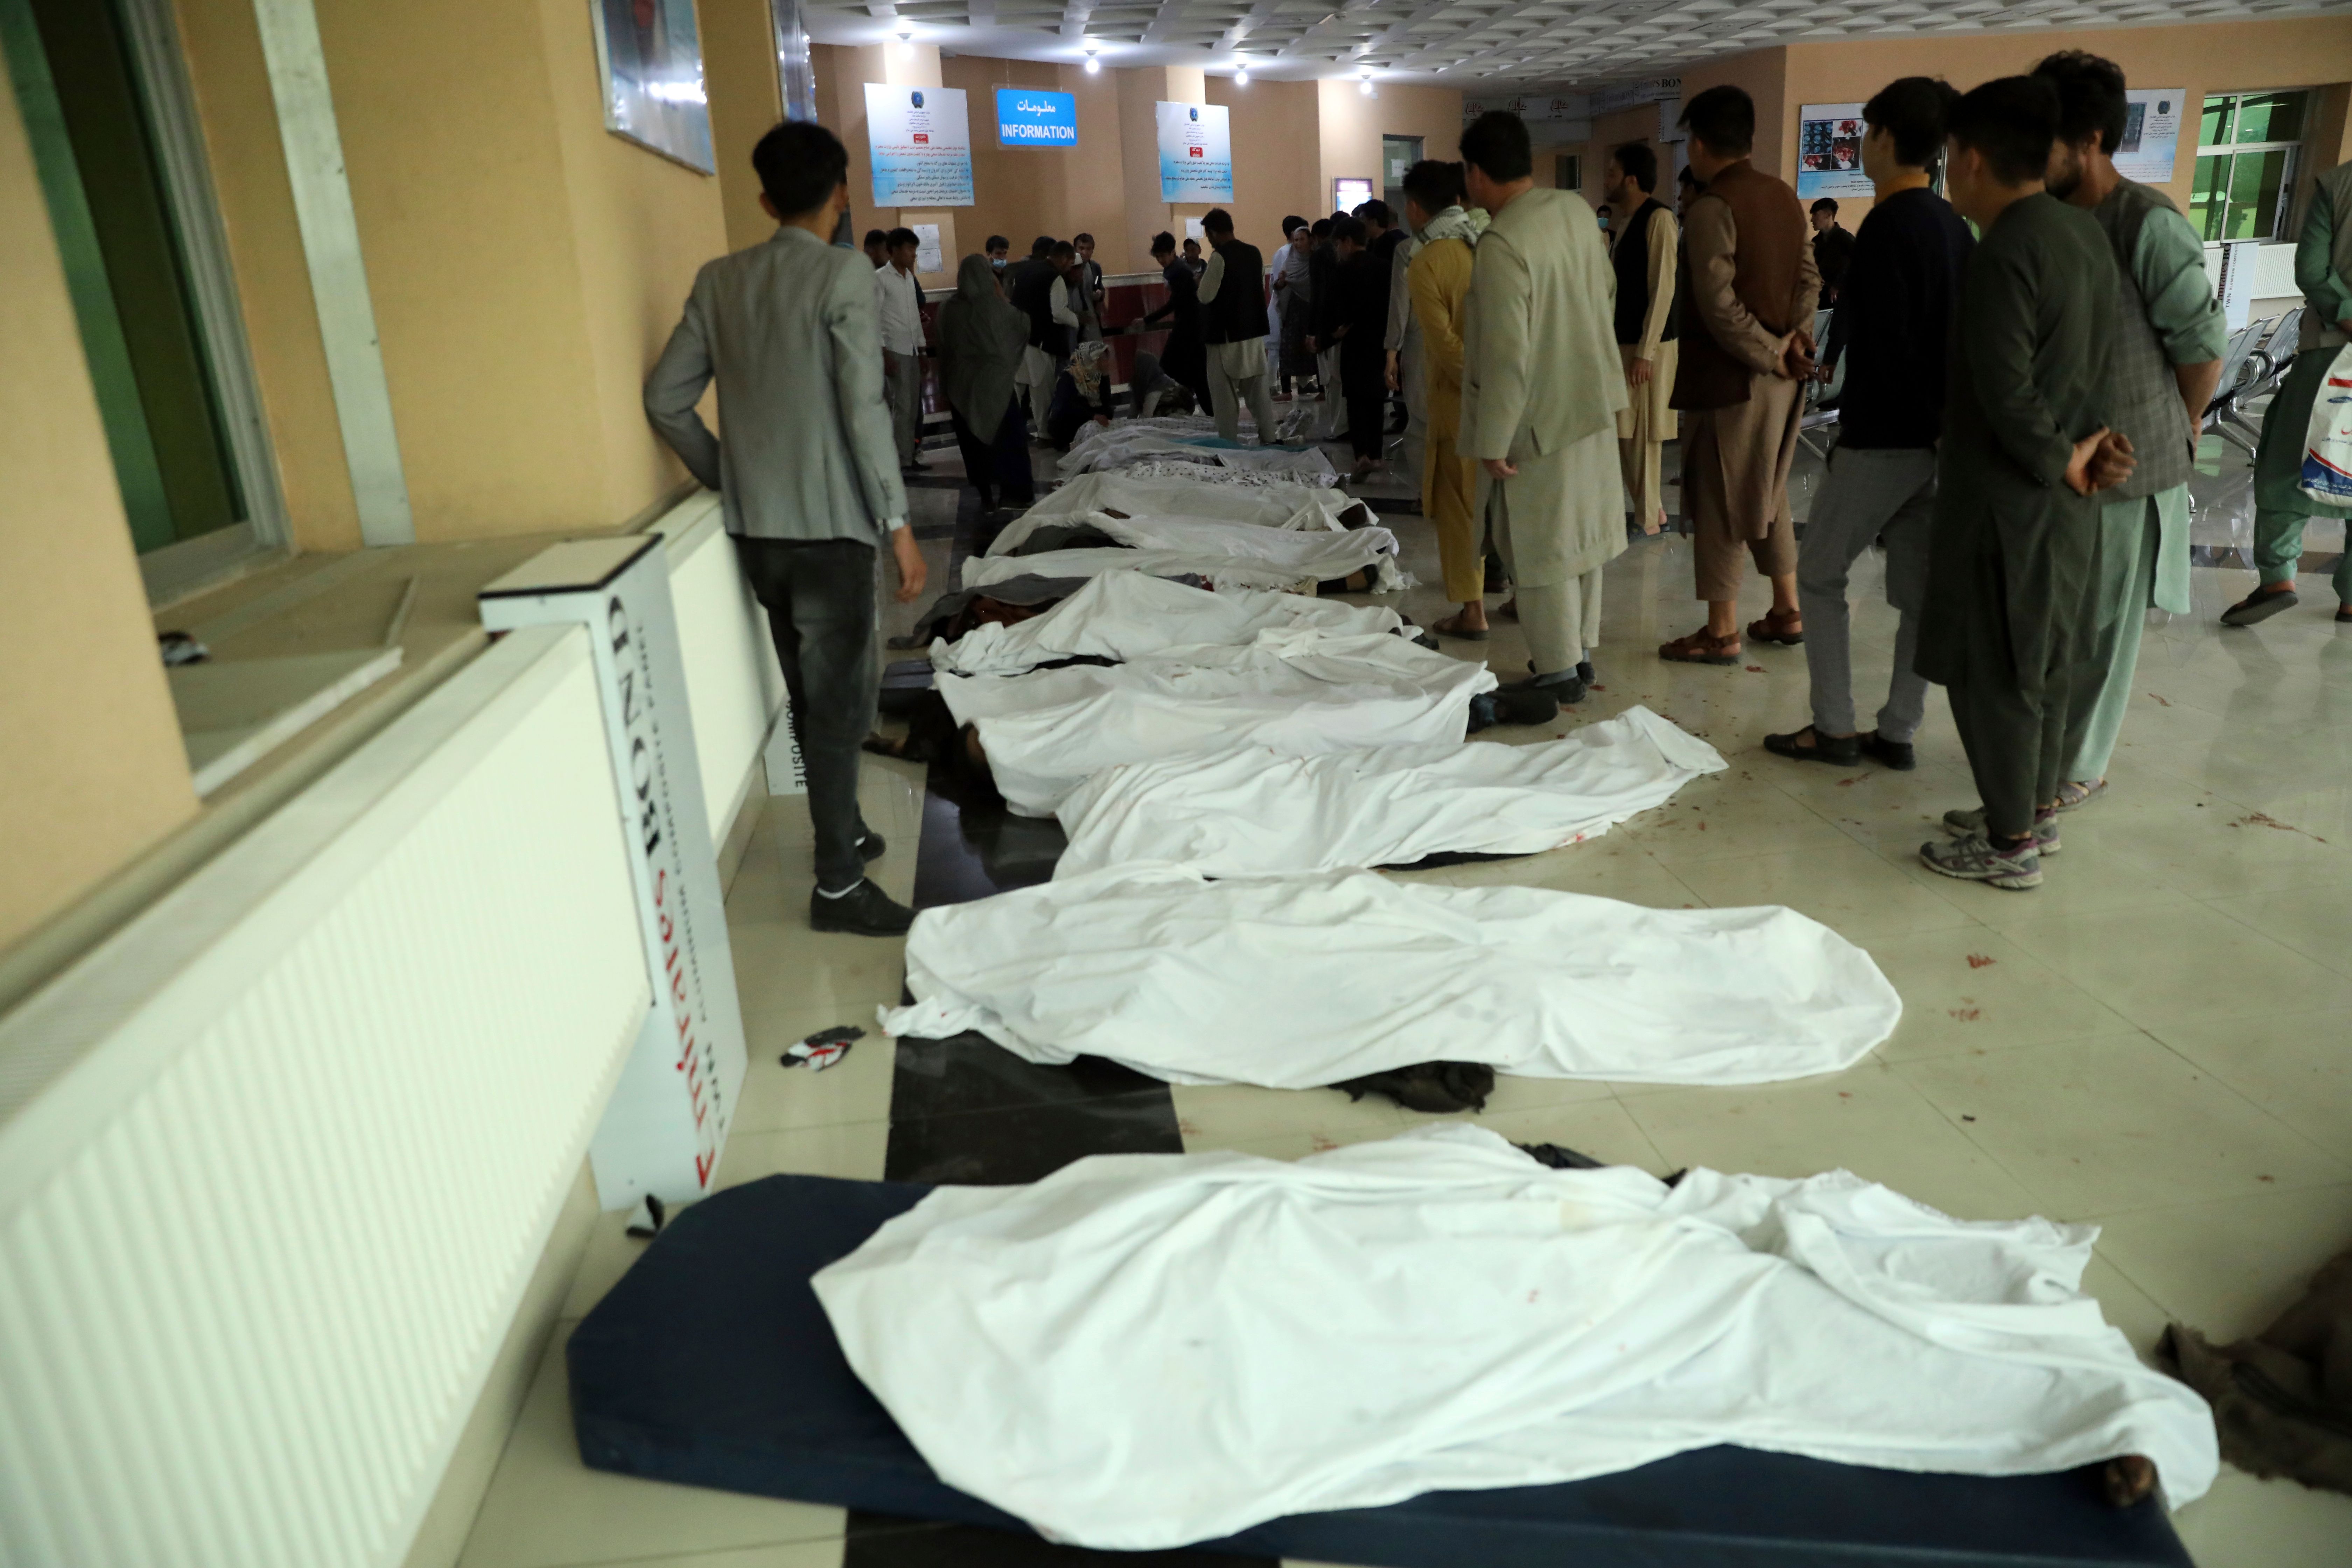 Afghan men try to identify the dead bodies at a hospital after a bomb explosion near a school west of Kabul, Afghanistan, Sat